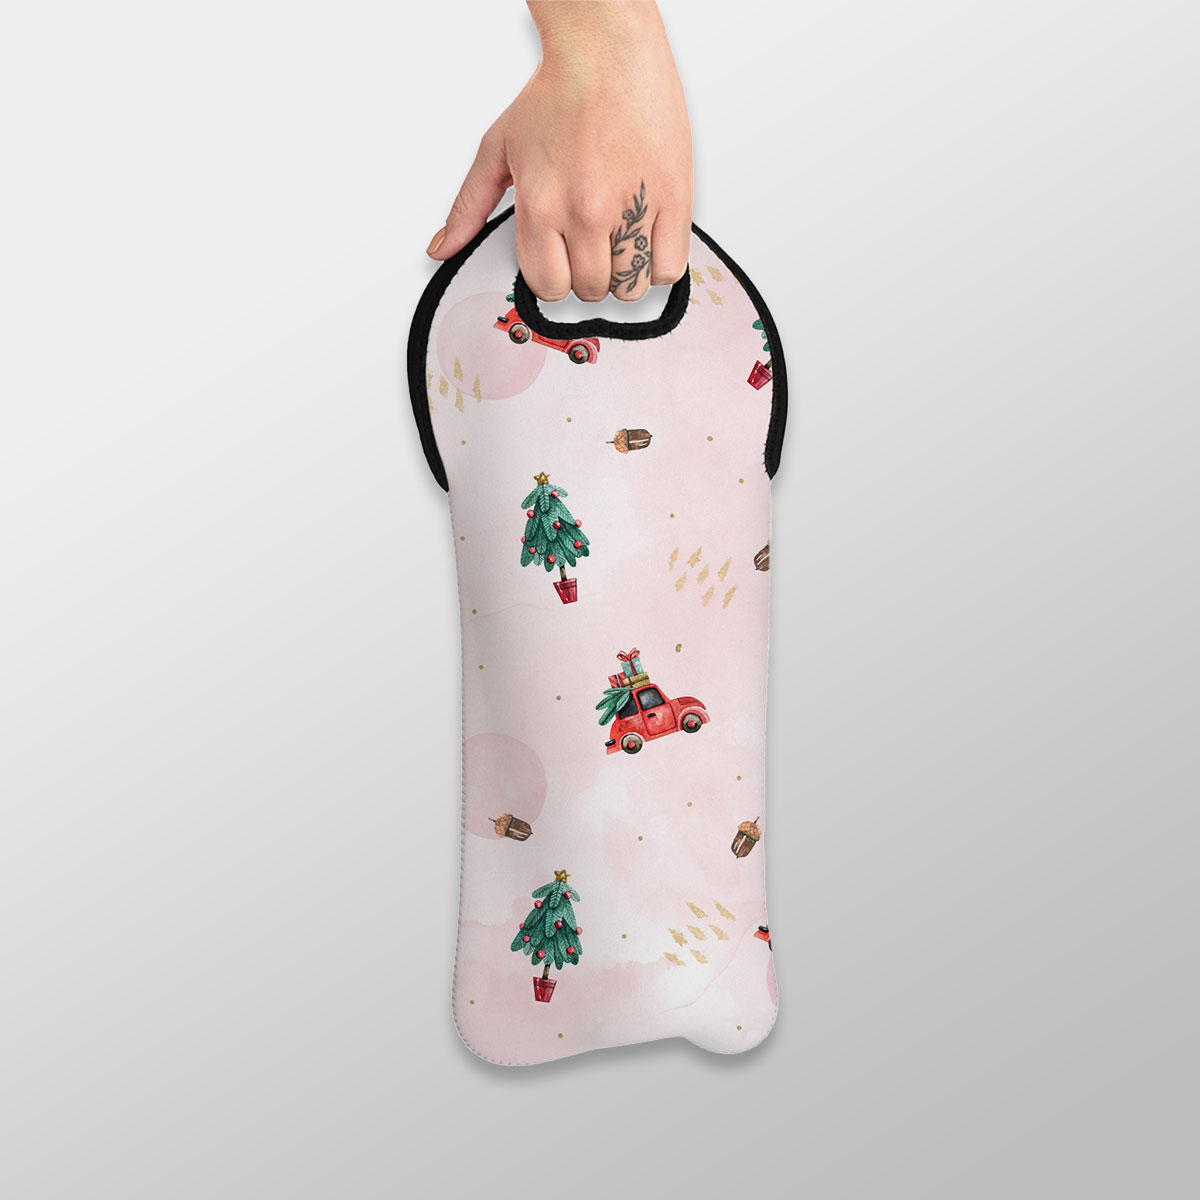 Watercolor Christmas Car With Gifts And Acorns Pink Pattern Wine Tote Bag